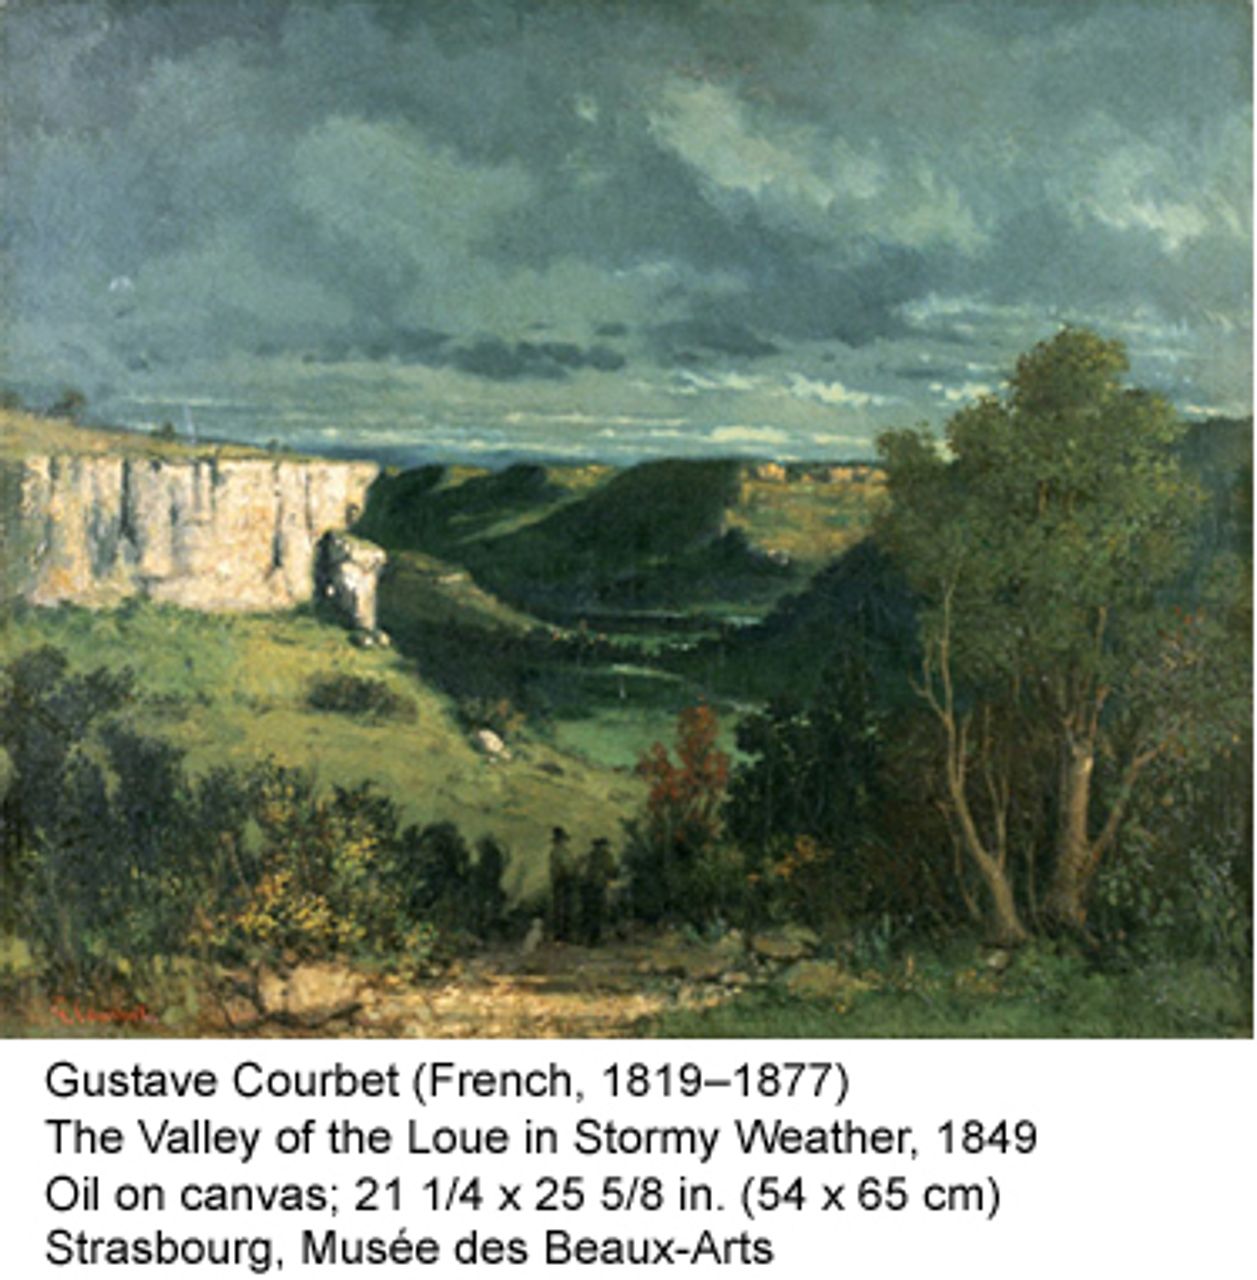 Courbet - The valley of the Loue in stormy weather